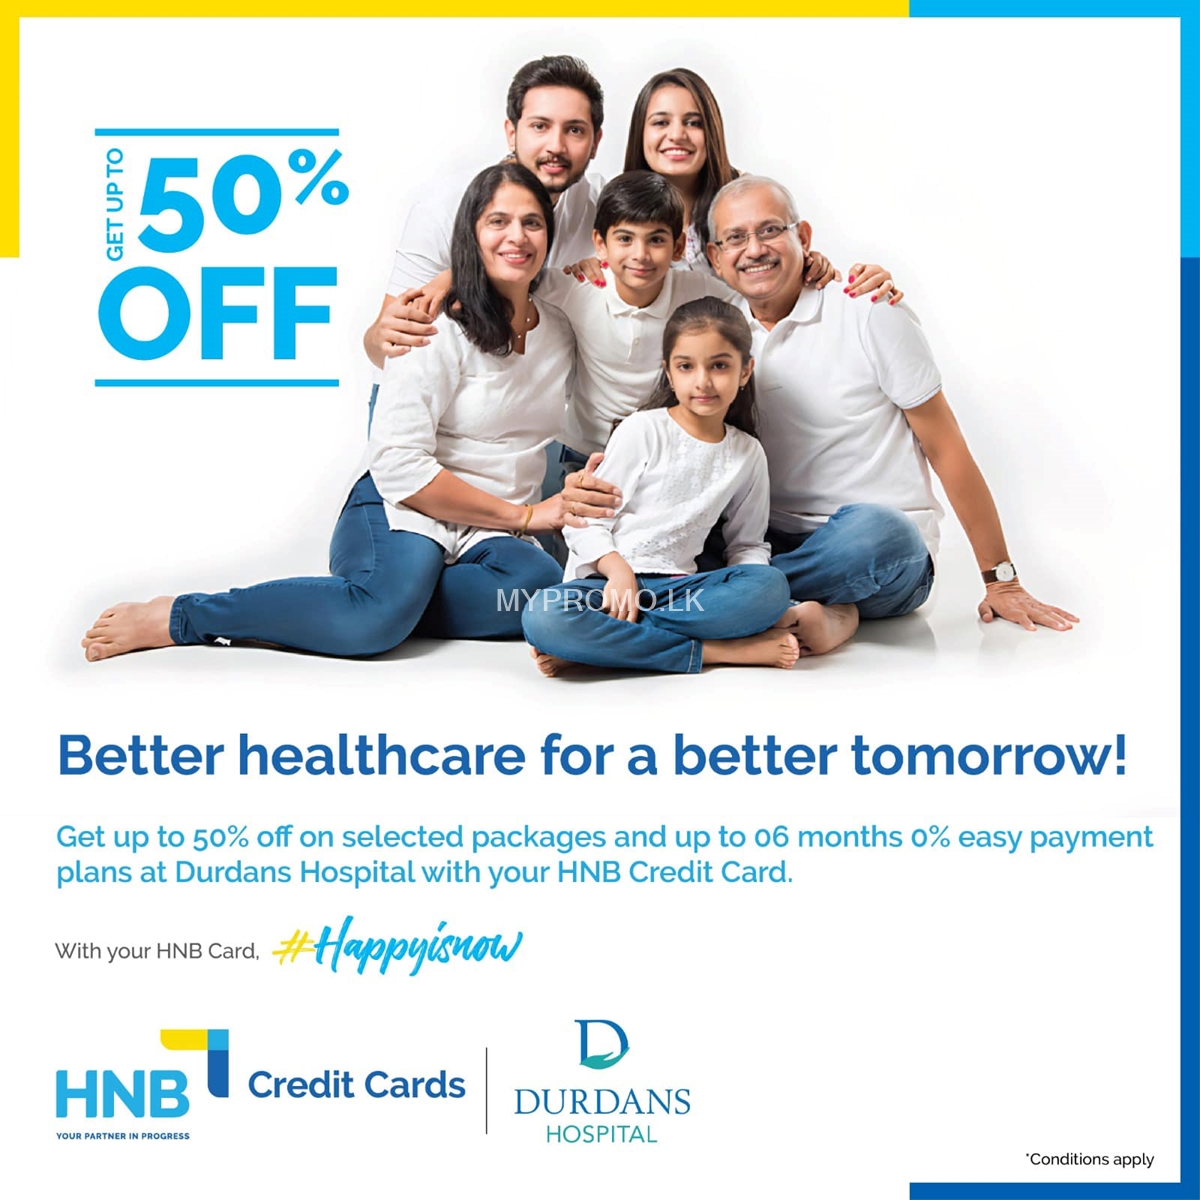 Enjoy up to 50% off on selected packages at Durdans Hospital with your HNB Credit Card